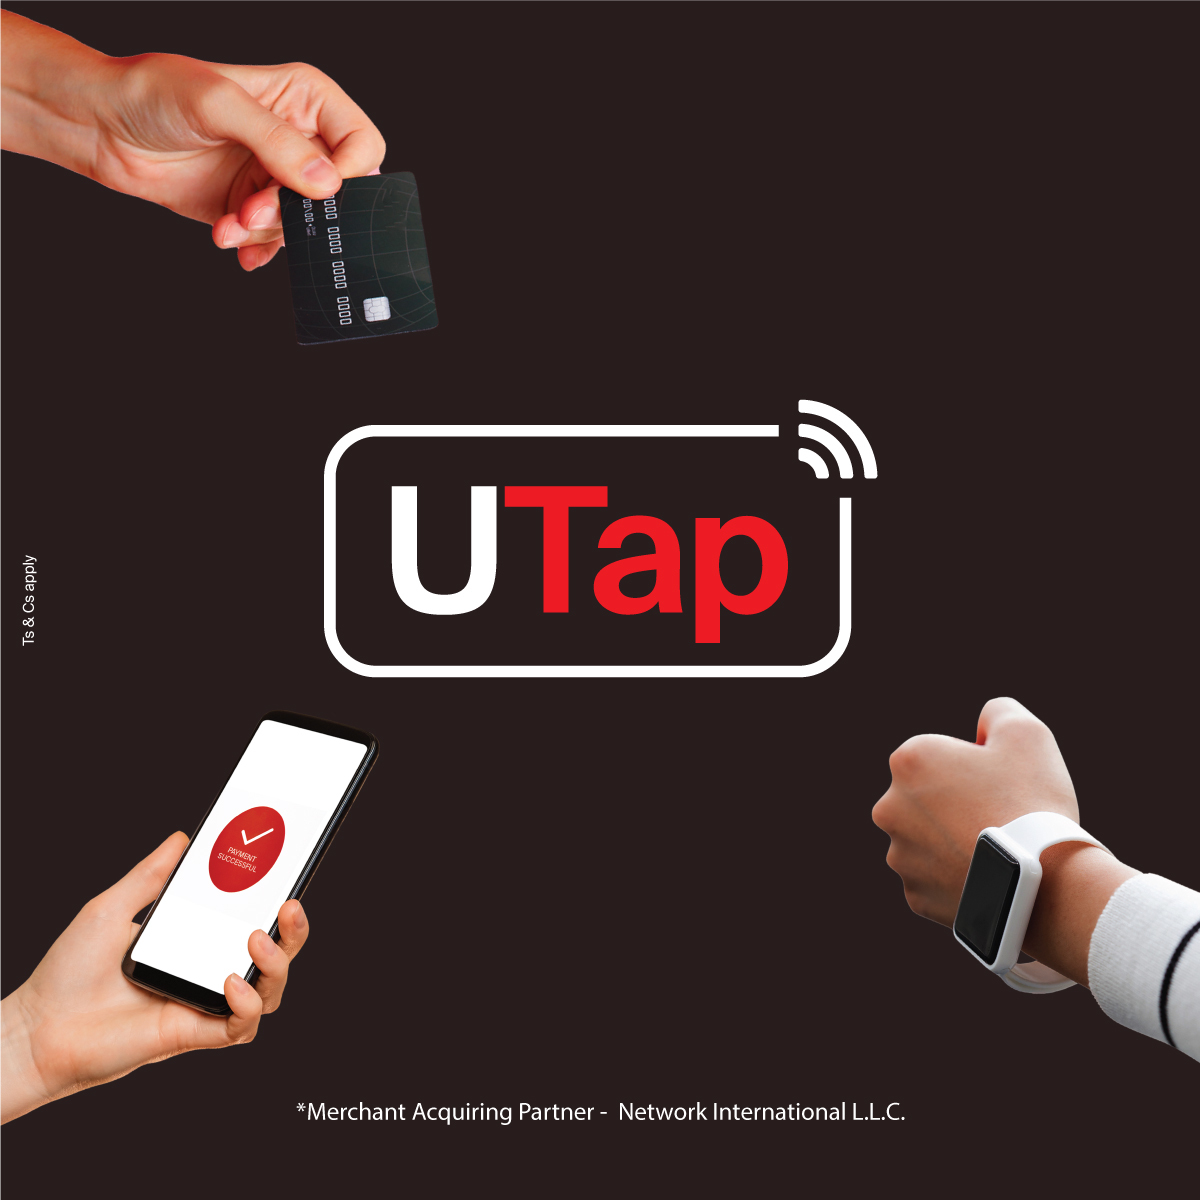 etisalat By e& Launches Payment Solution uTap